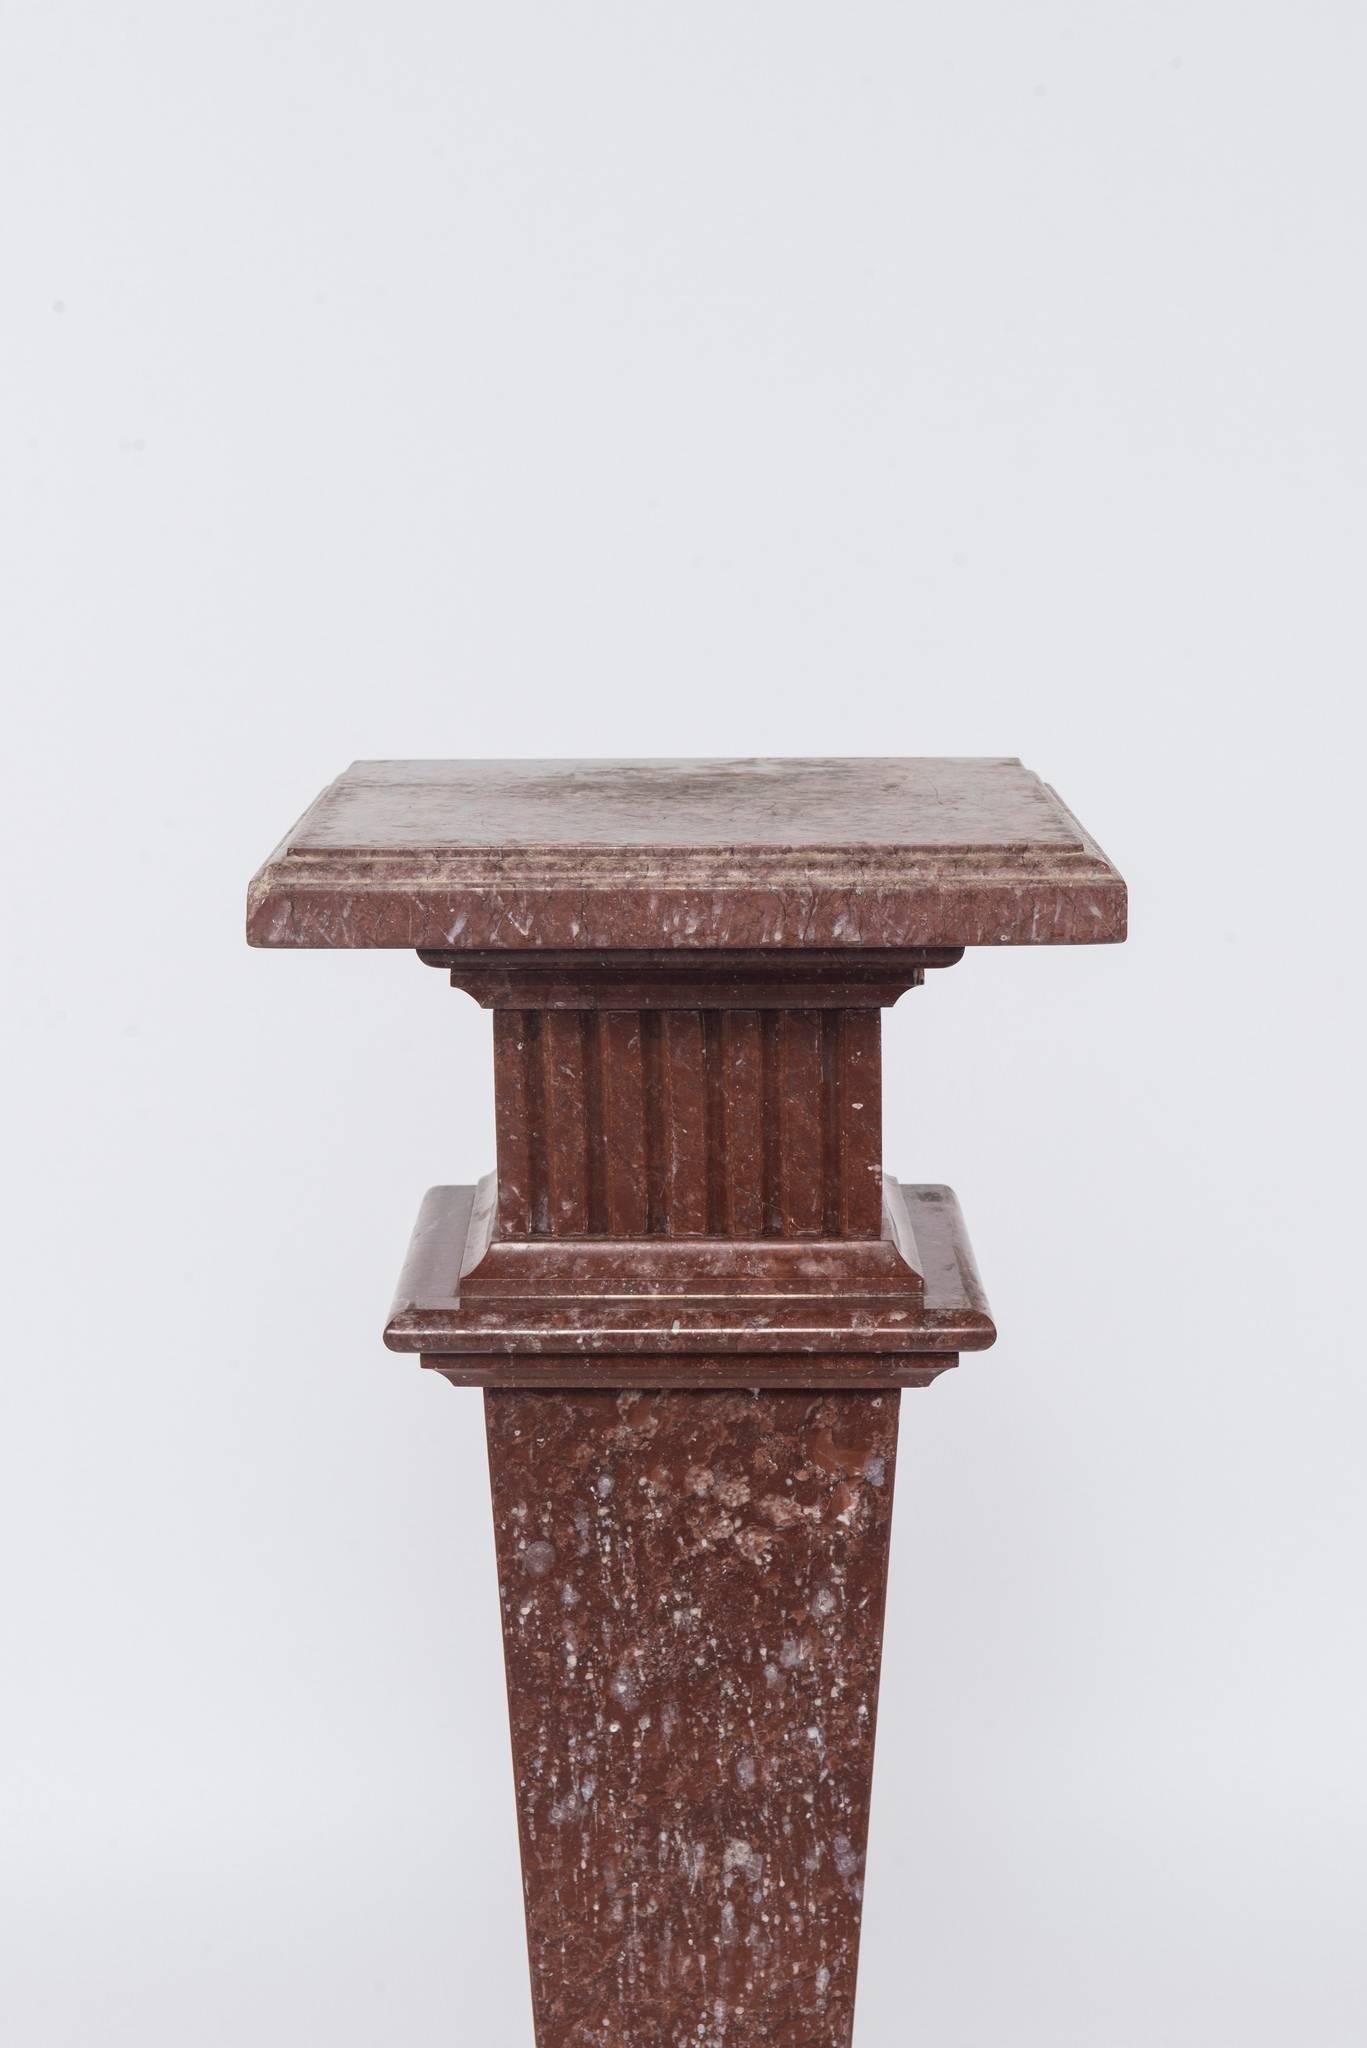 An early 20th century neoclassical style red/rouge marble pedestal.